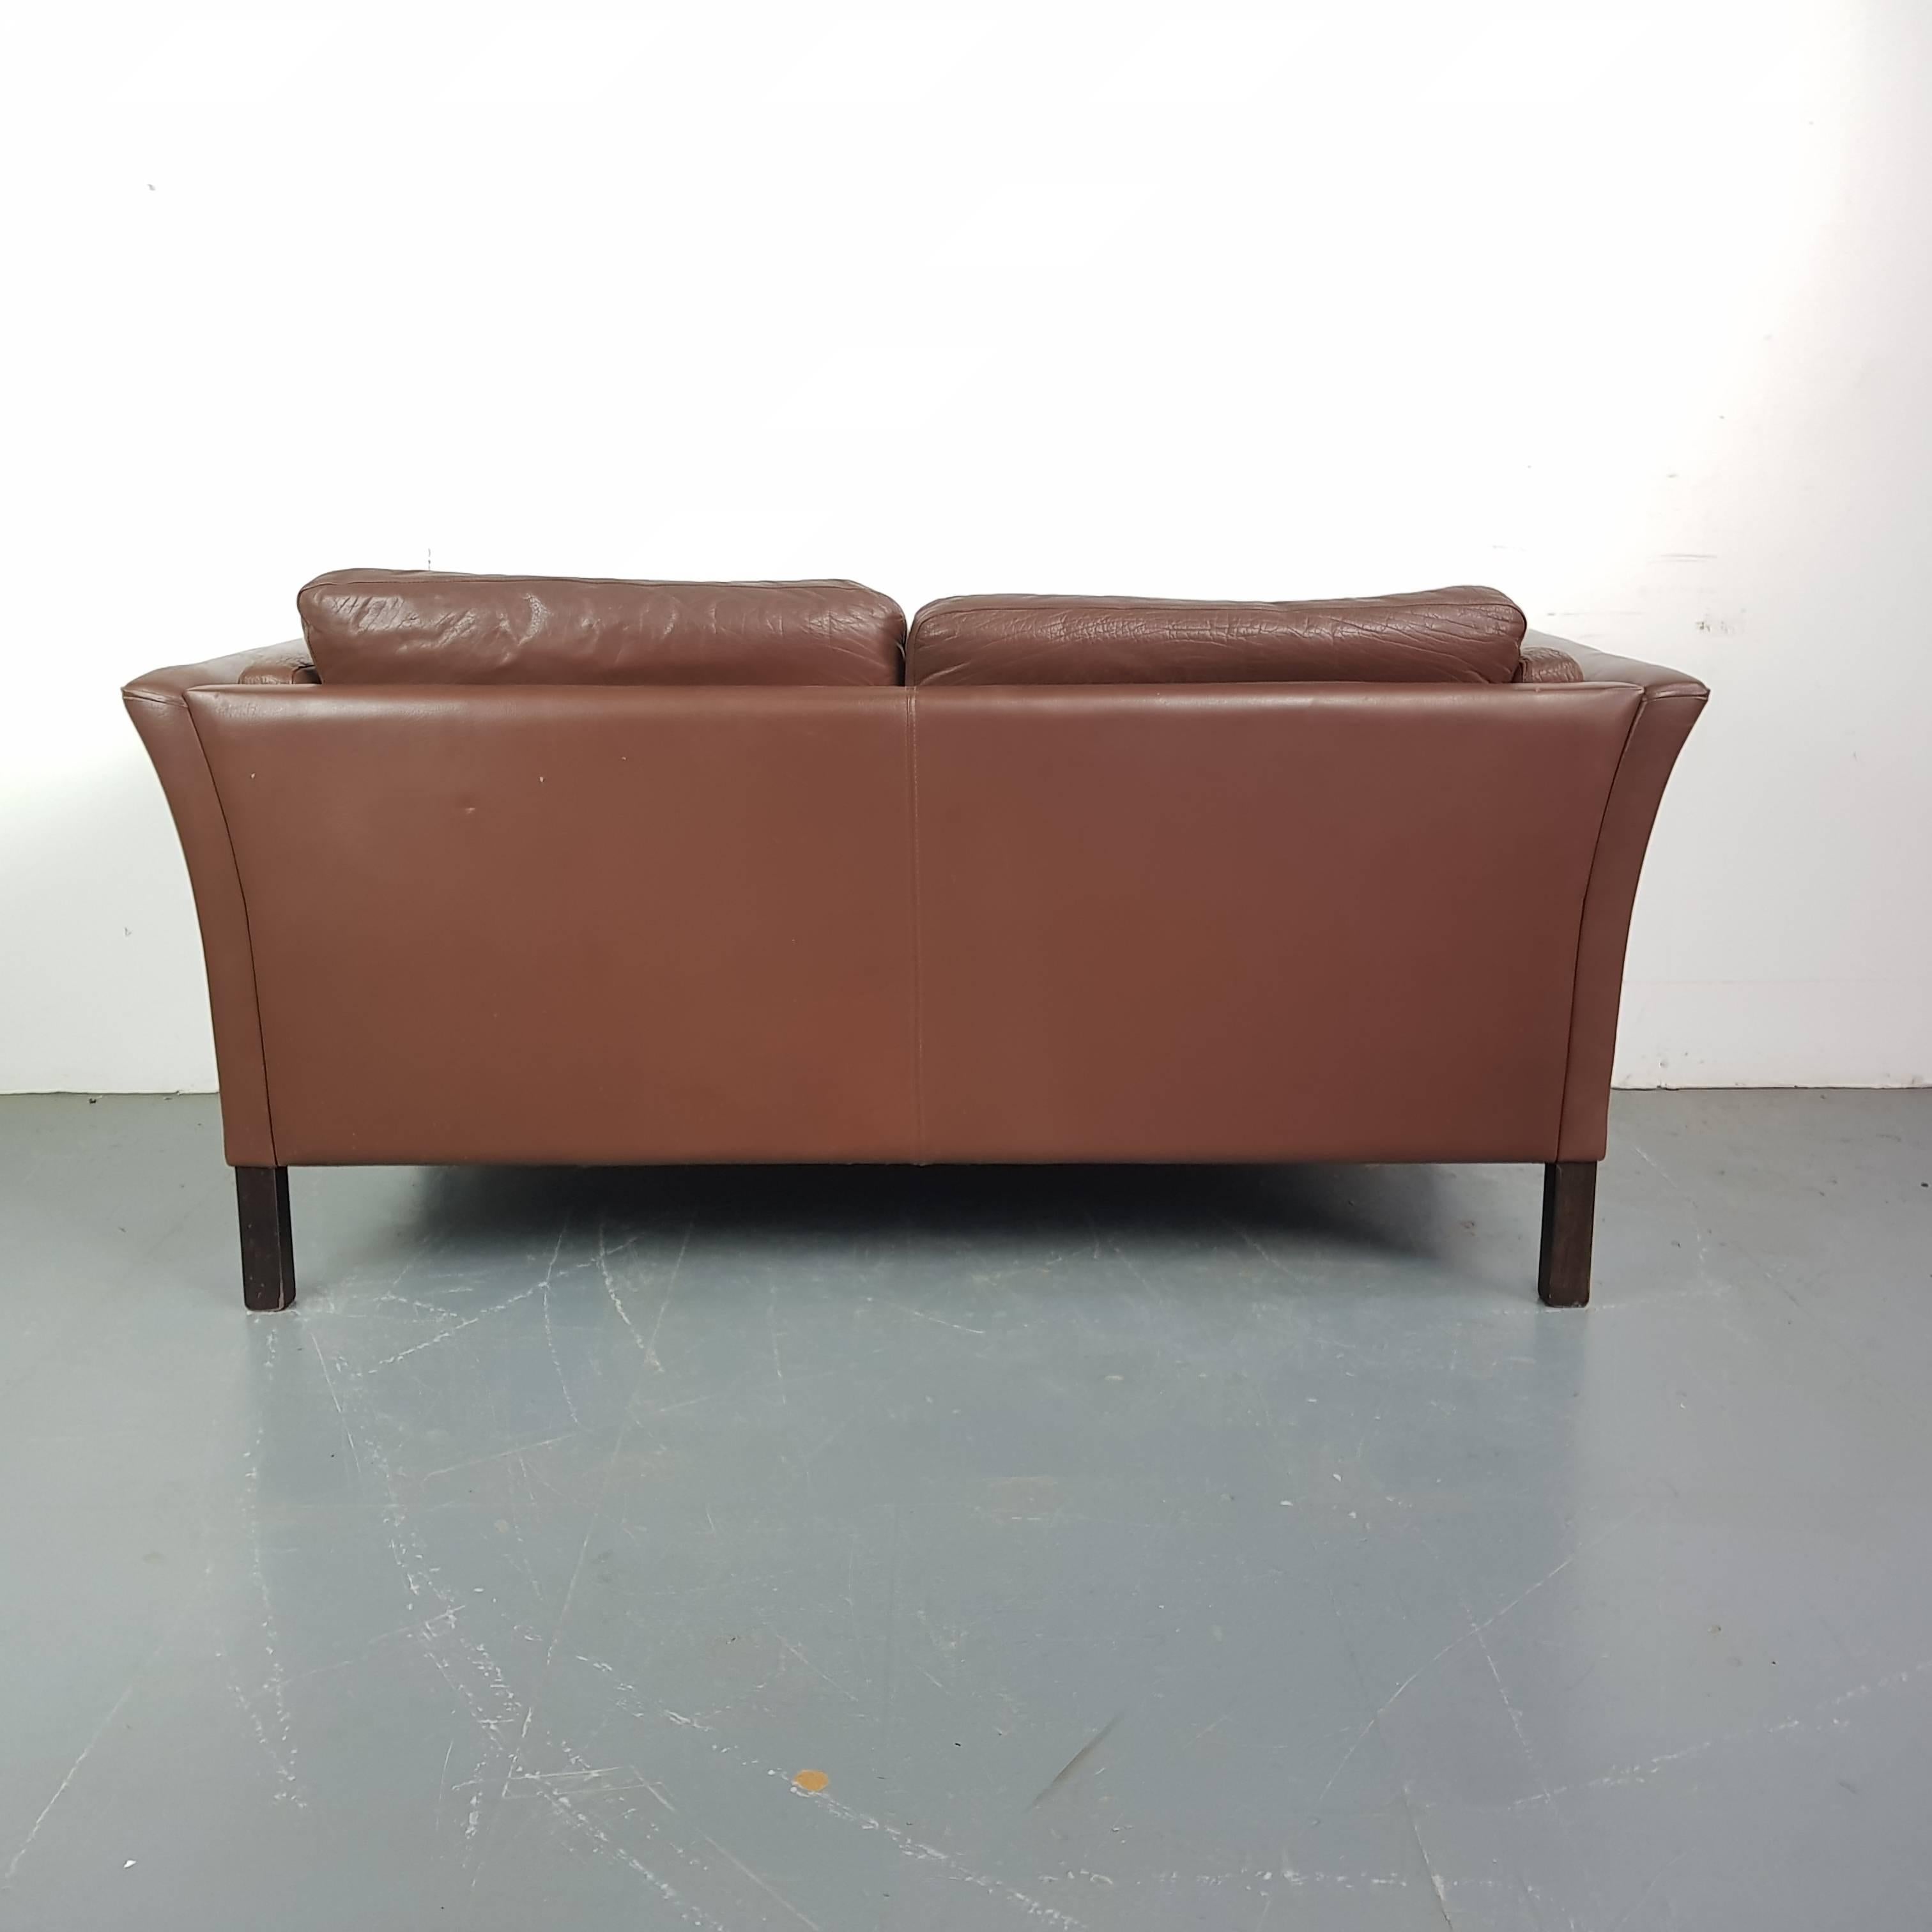 1970s Chestnut Brown Leather Mogensen Style Two-Seat Sofa For Sale 2